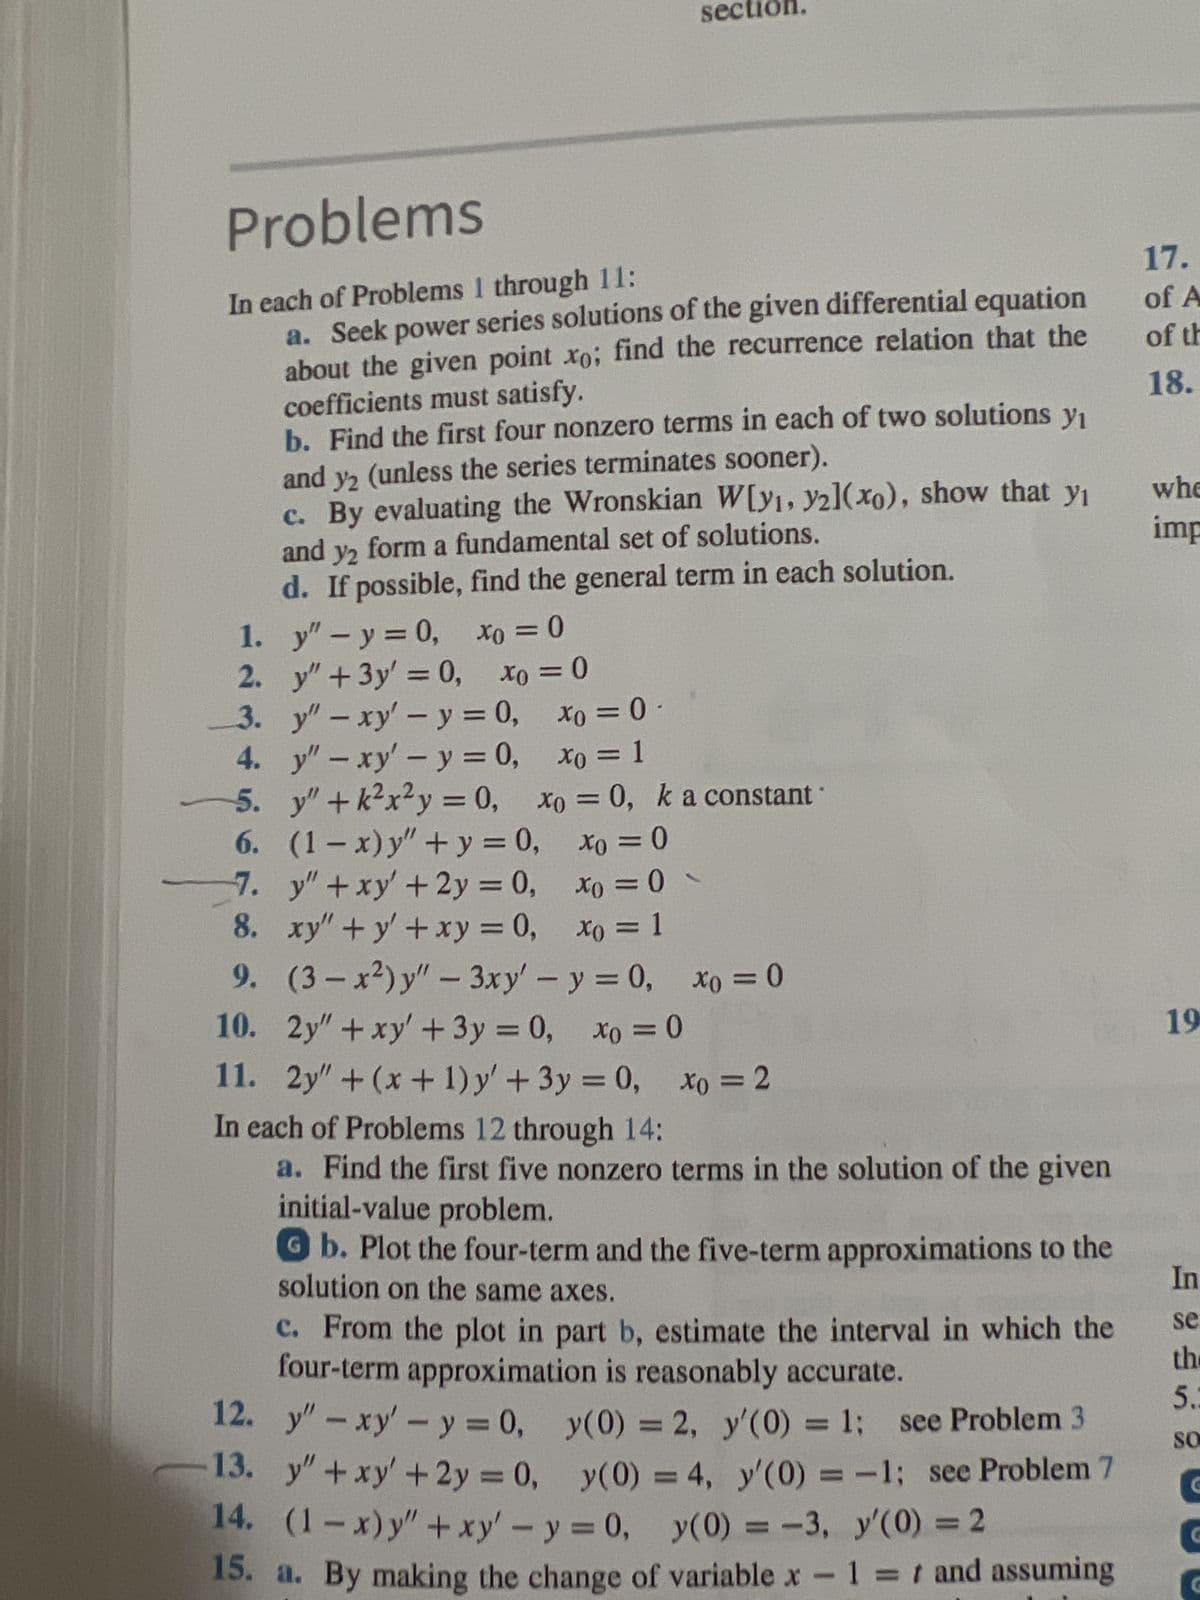 Problems
In each of Problems 1 through 11:
a. Seek power series solutions of the given differential equation
about the given point xo; find the recurrence relation that the
coefficients must satisfy.
b. Find the first four nonzero terms in each of two solutions y₁
and y2 (unless the series terminates sooner).
c. By evaluating the Wronskian W[yı, y21(xo), show that y₁
and y2 form a fundamental set of solutions.
d. If possible, find the general term in each solution.
1.
y" - y = 0,
2.
y" + 3y = 0,
3.
y" - xy' - y = 0,
4.
y" - xy' - y = 0,
5.
y" +k²x²y = 0,
6.
(1-x)y" + y = 0,
7.
y" + xy' + 2y = 0,
8.
xy" + y + xy = 0,
9.
(3-x²) y" - 3xy' - y = 0, xo = 0
10.
2y" + xy' + 3y = 0, xo =0
11. 2y" + (x + 1) y' + 3y = 0, Xo = 2
In each of Problems 12 through 14:
a. Find the first five nonzero terms in the solution of the given
initial-value problem.
Xo = = 0
12.
13.
xo = 0
sec on.
Xo = 0
Xo = 1
xo = 0, k a constant
xo = 0
x0 = 0
xo = 1
●
y" - xy' - y = 0,
y" + xy' + 2y = 0,
Gb. Plot the four-term and the five-term approximations to the
solution on the same axes.
c. From the plot in part b, estimate the interval in which the
four-term approximation is reasonably accurate.
y(0) = 2, y'(0) = 1; see Problem 3
y(0) = 4, y'(0) = -1; see Problem 7
14. (1-x) y" + xy' - y = 0, y(0) = -3, y'(0) = 2
15. a. By making the change of variable x - 1 = t and assuming
17.
of A
of th
18.
whe
imp
19
In
se
the
5.3
SO